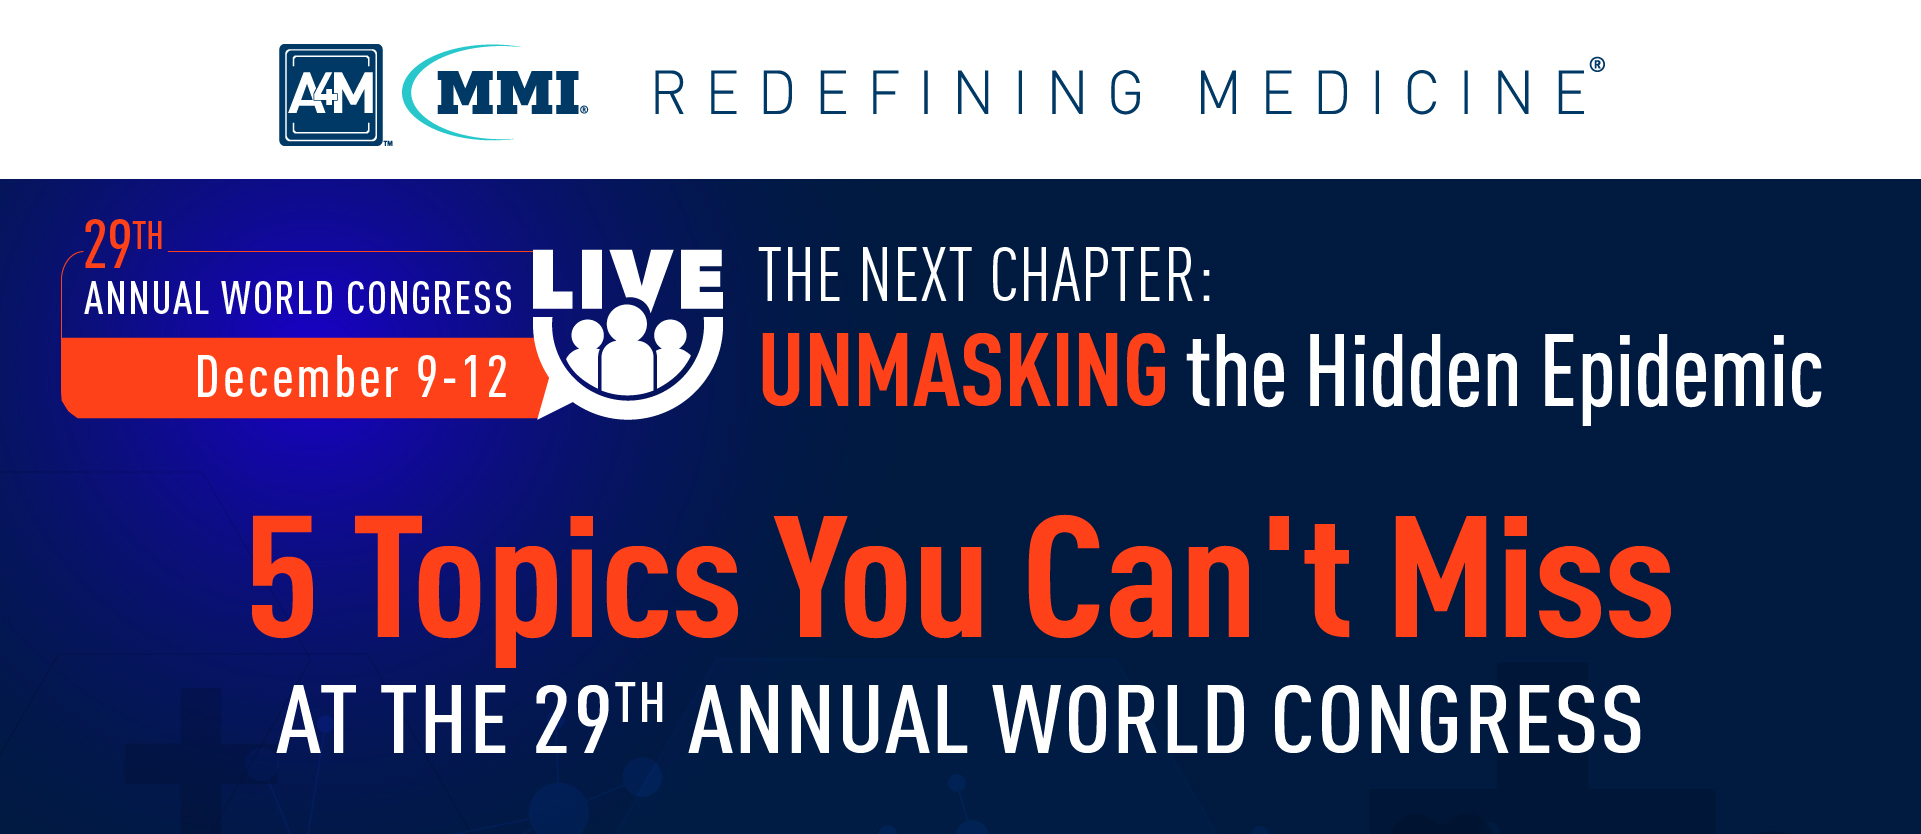 5 Topics You Can't Miss at the 29th Annual World Congress • A4M Blog